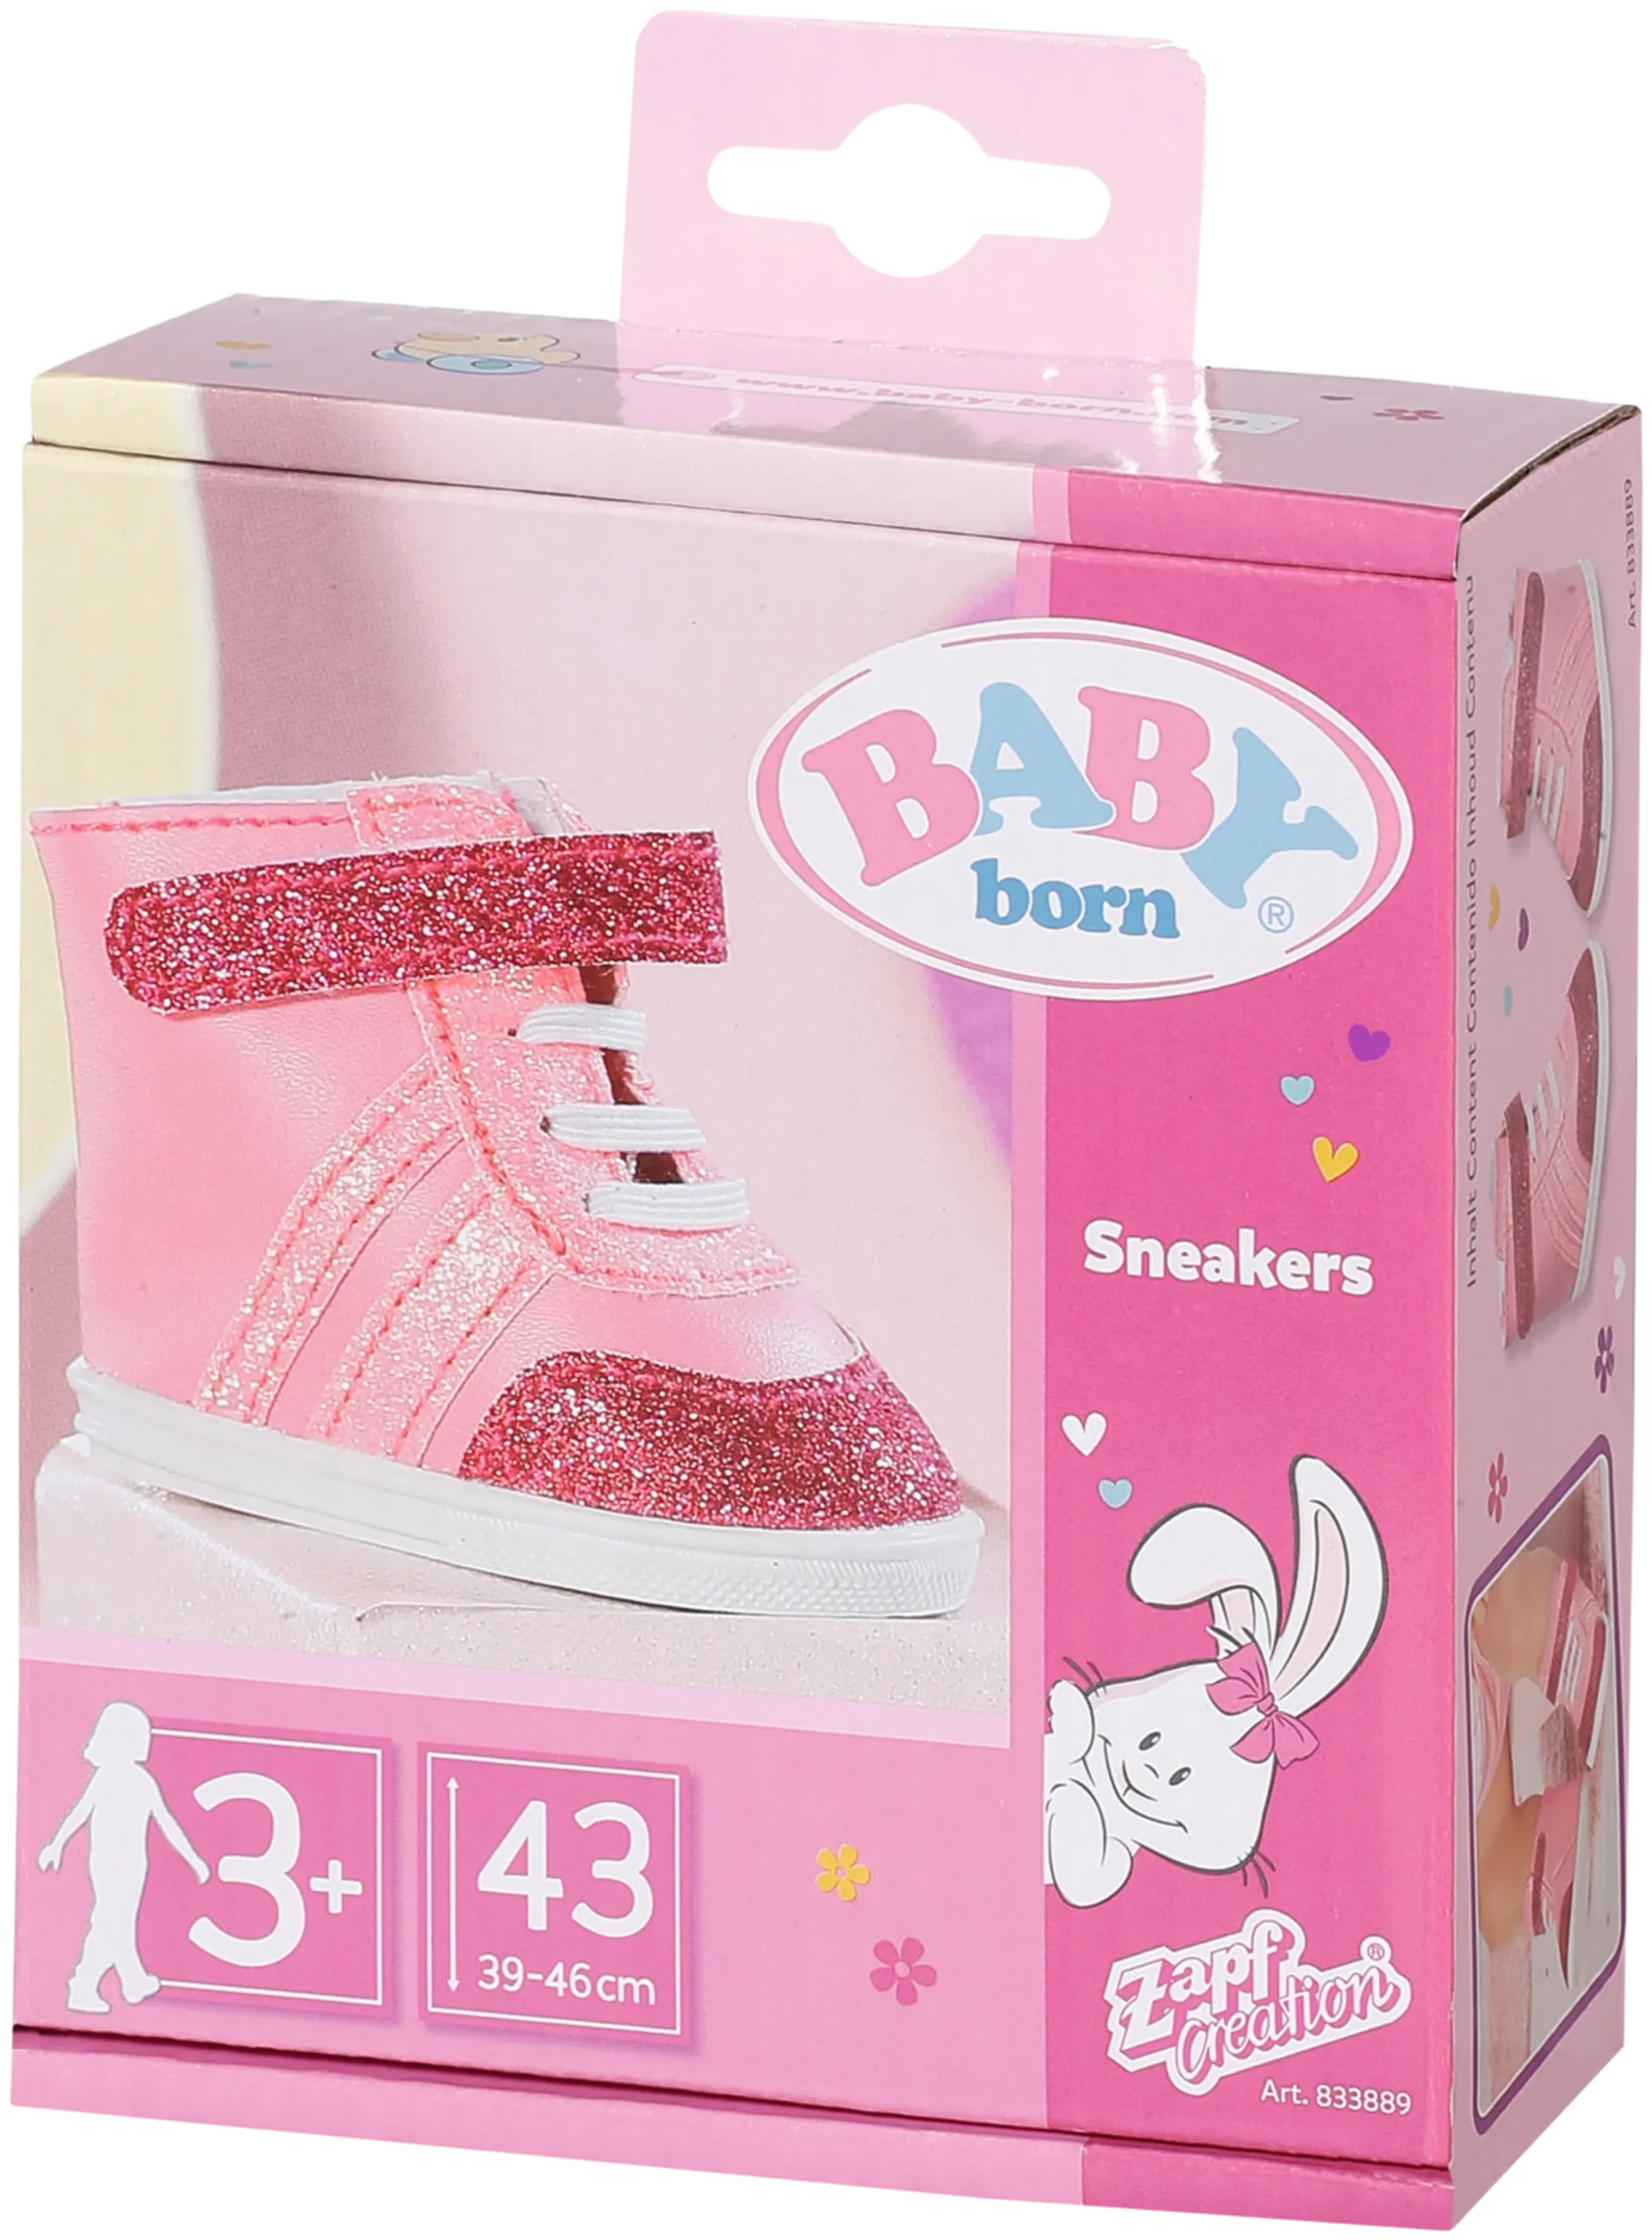 BABY born Sneakers Pink 43cm - 3